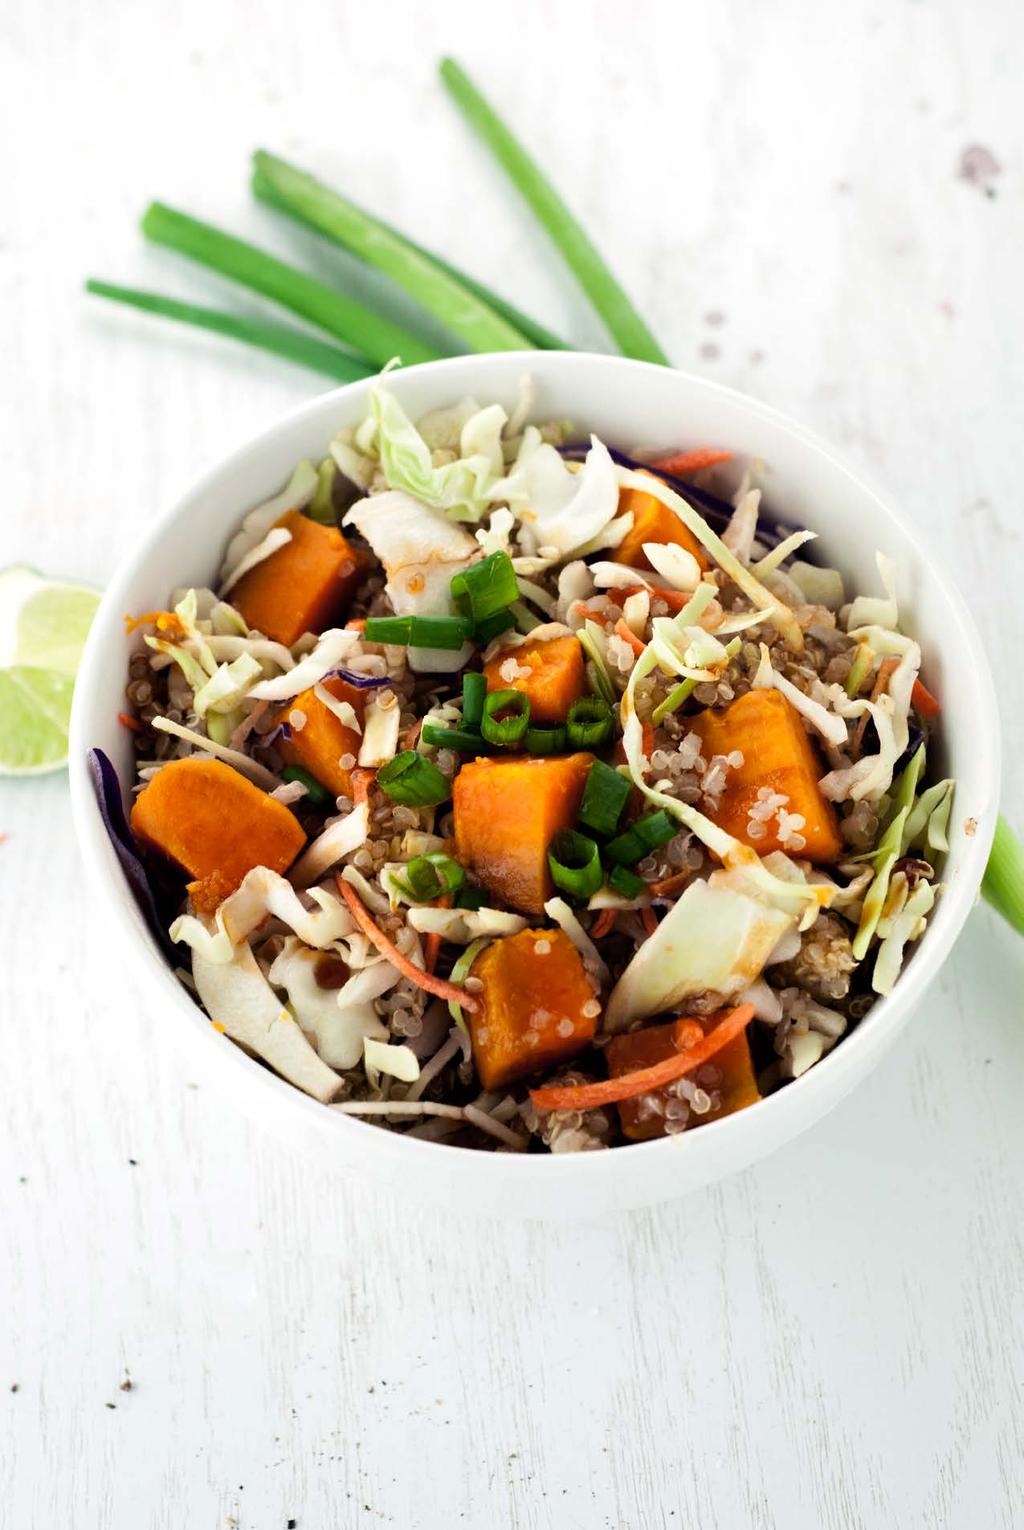 21. Sweet Potato Quinoa Slaw Bowl Dicing the sweet potato before microwaving will help it cook faster, bringing this dish together in just a few minutes, with the help of pre-cooked quinoa!